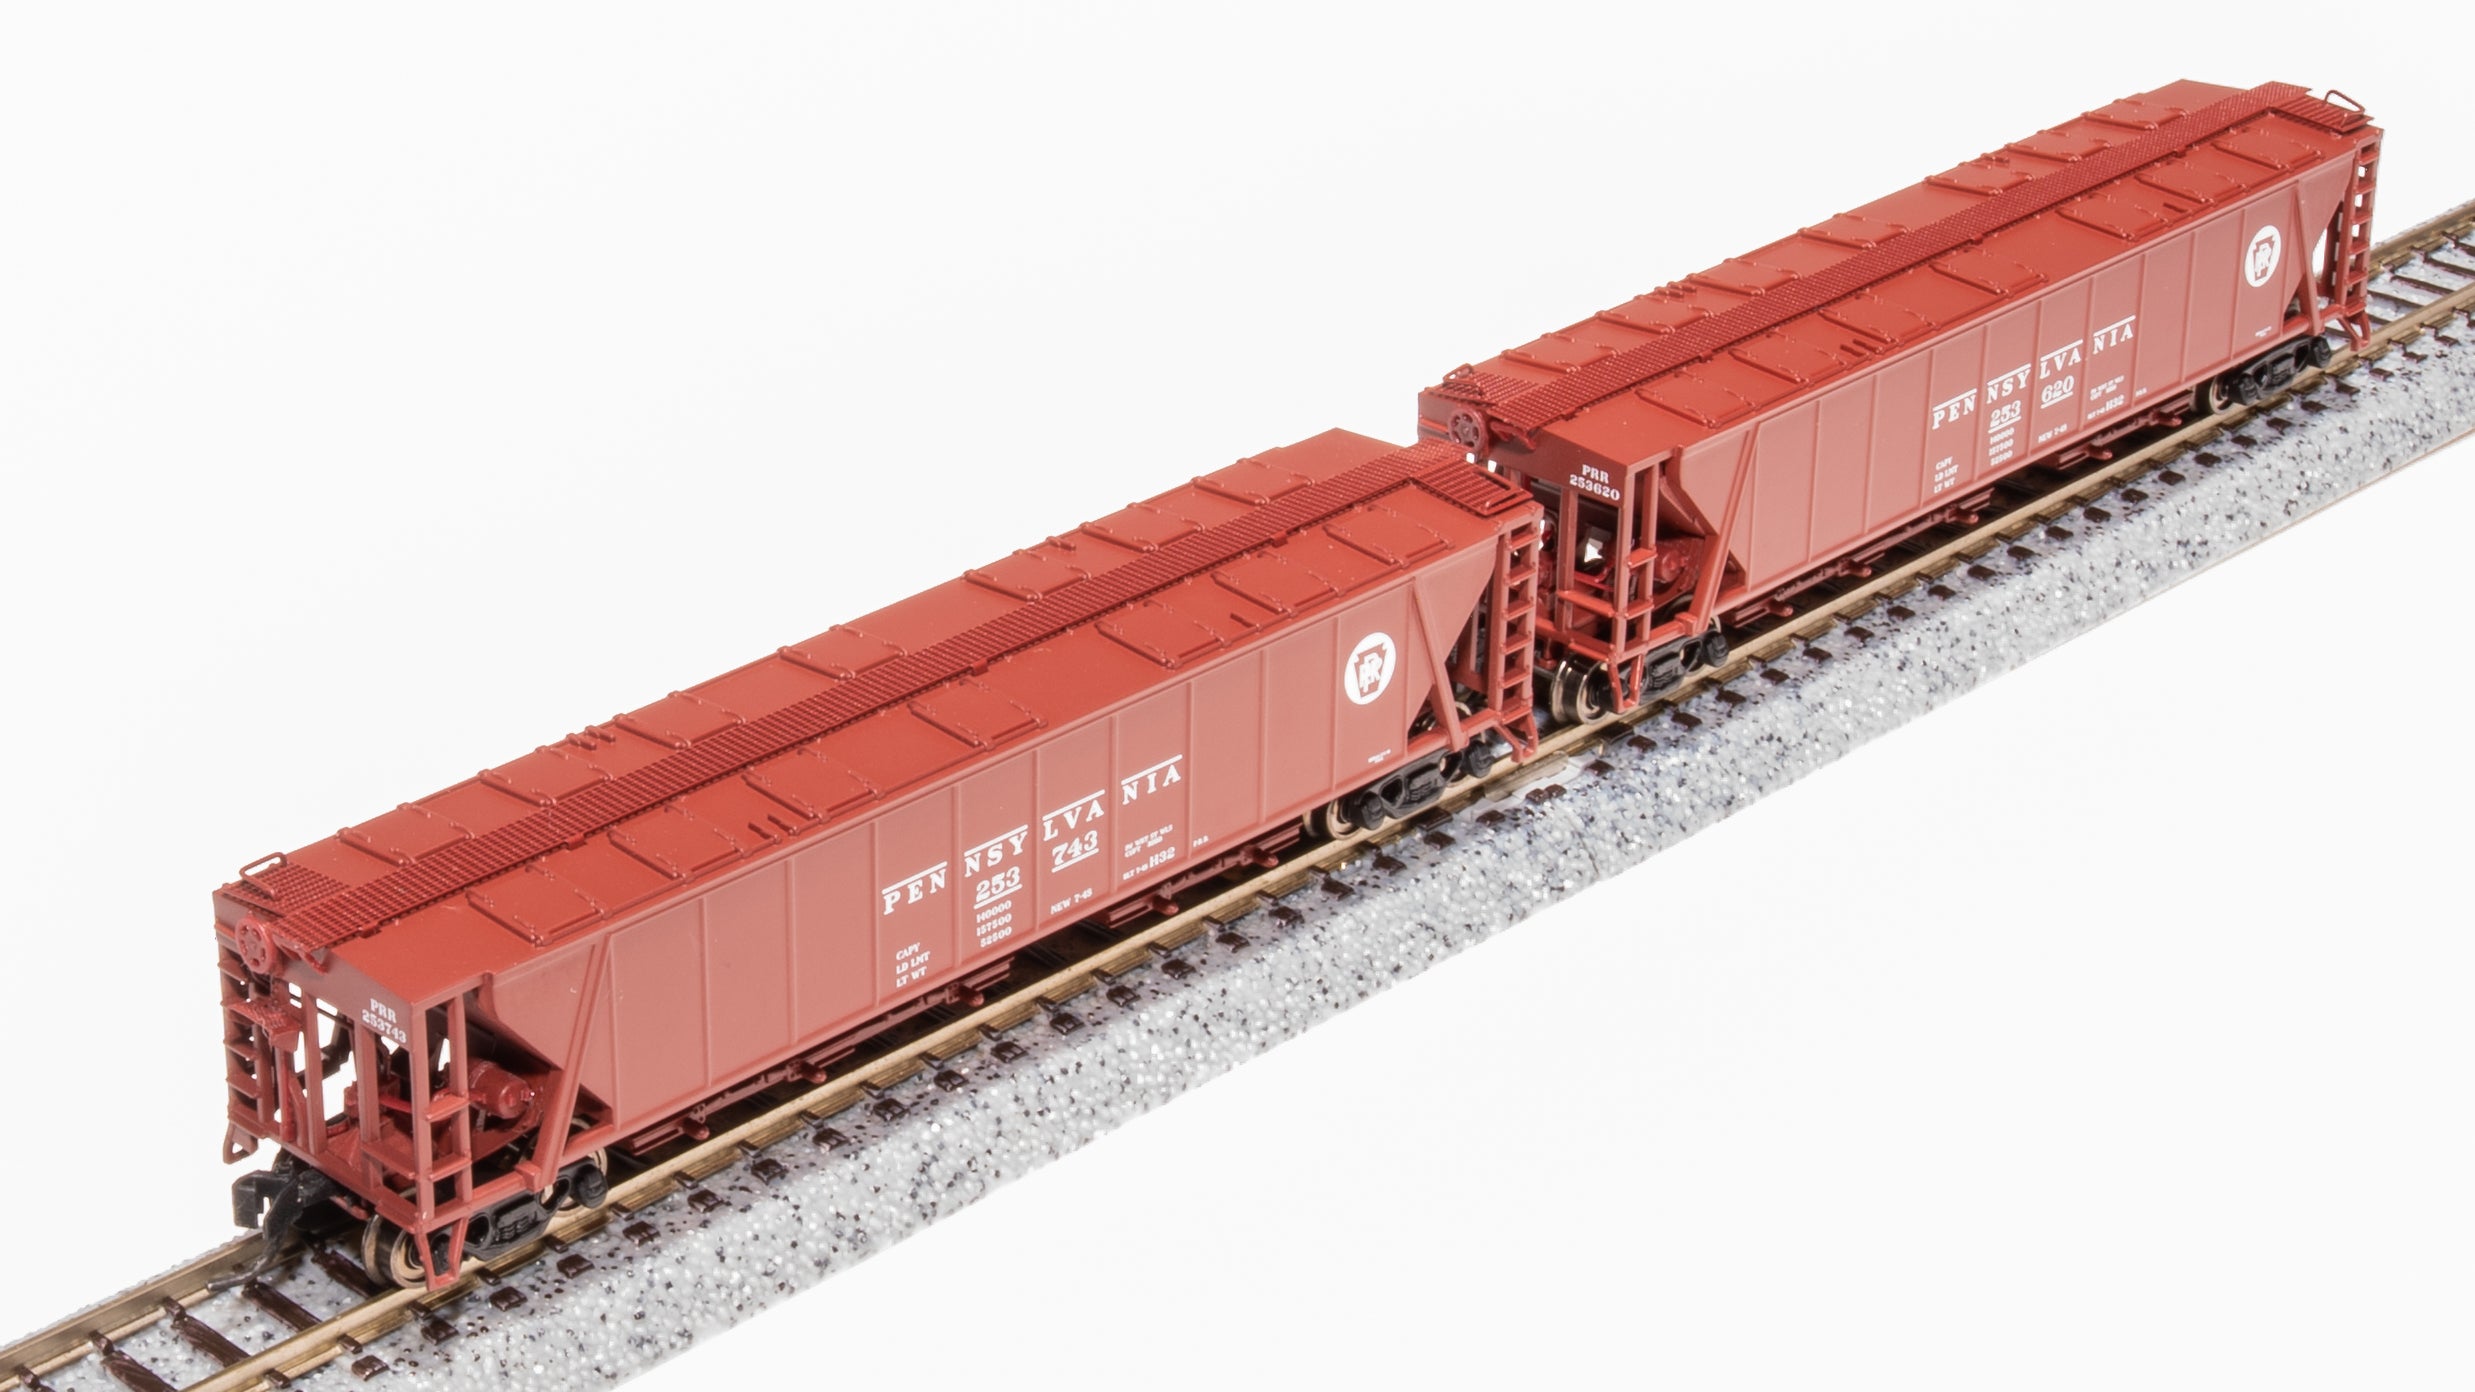 7251 H32 Covered Hopper, PRR, Freight Car Red with White Circle Keystone, 2-pack B, N Scale Default Title